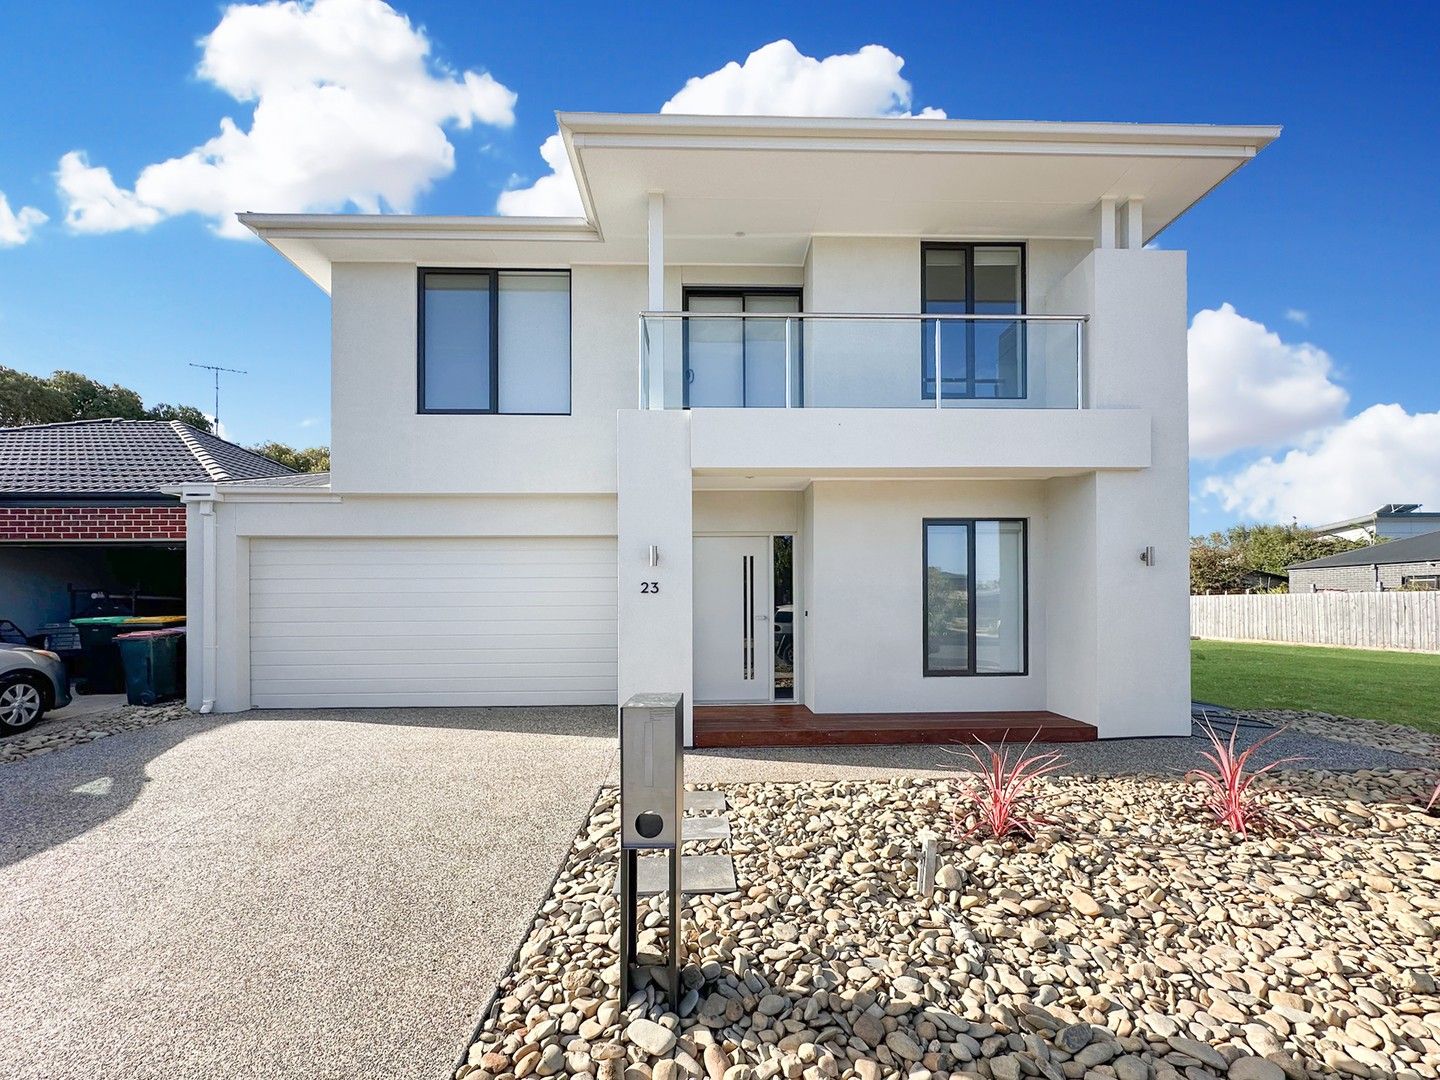 4 bedrooms House in 23 Cranberry Way TORQUAY VIC, 3228